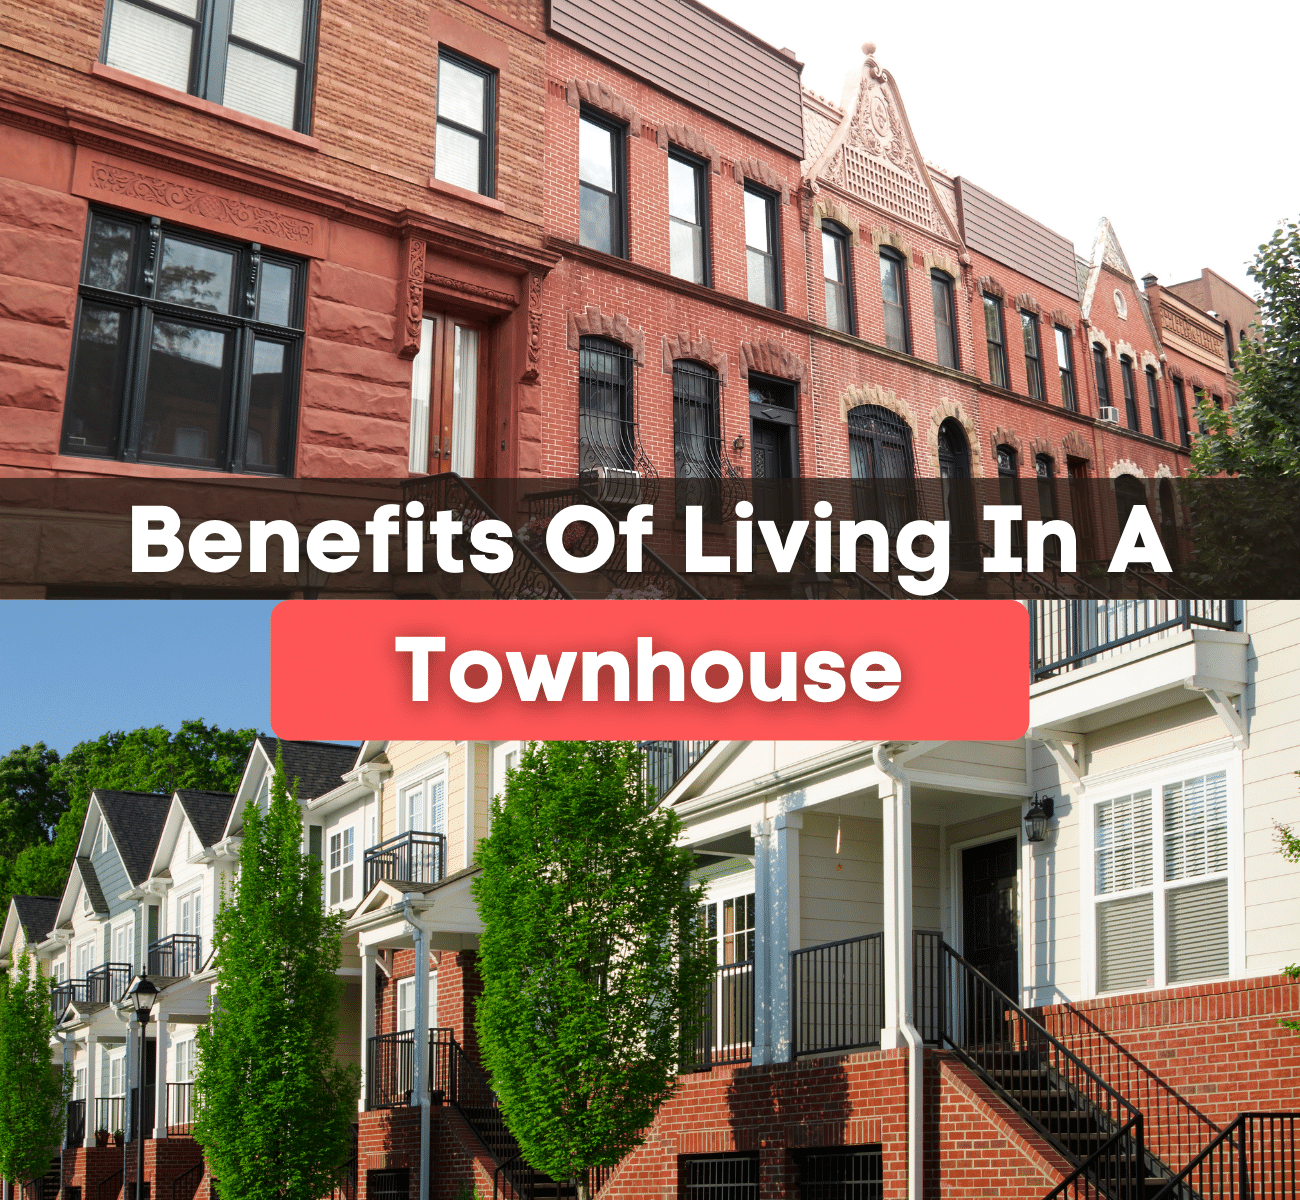 Benefits of living in a townhouse - brick townhouse in Brooklyn, NY and victorian style townhouse